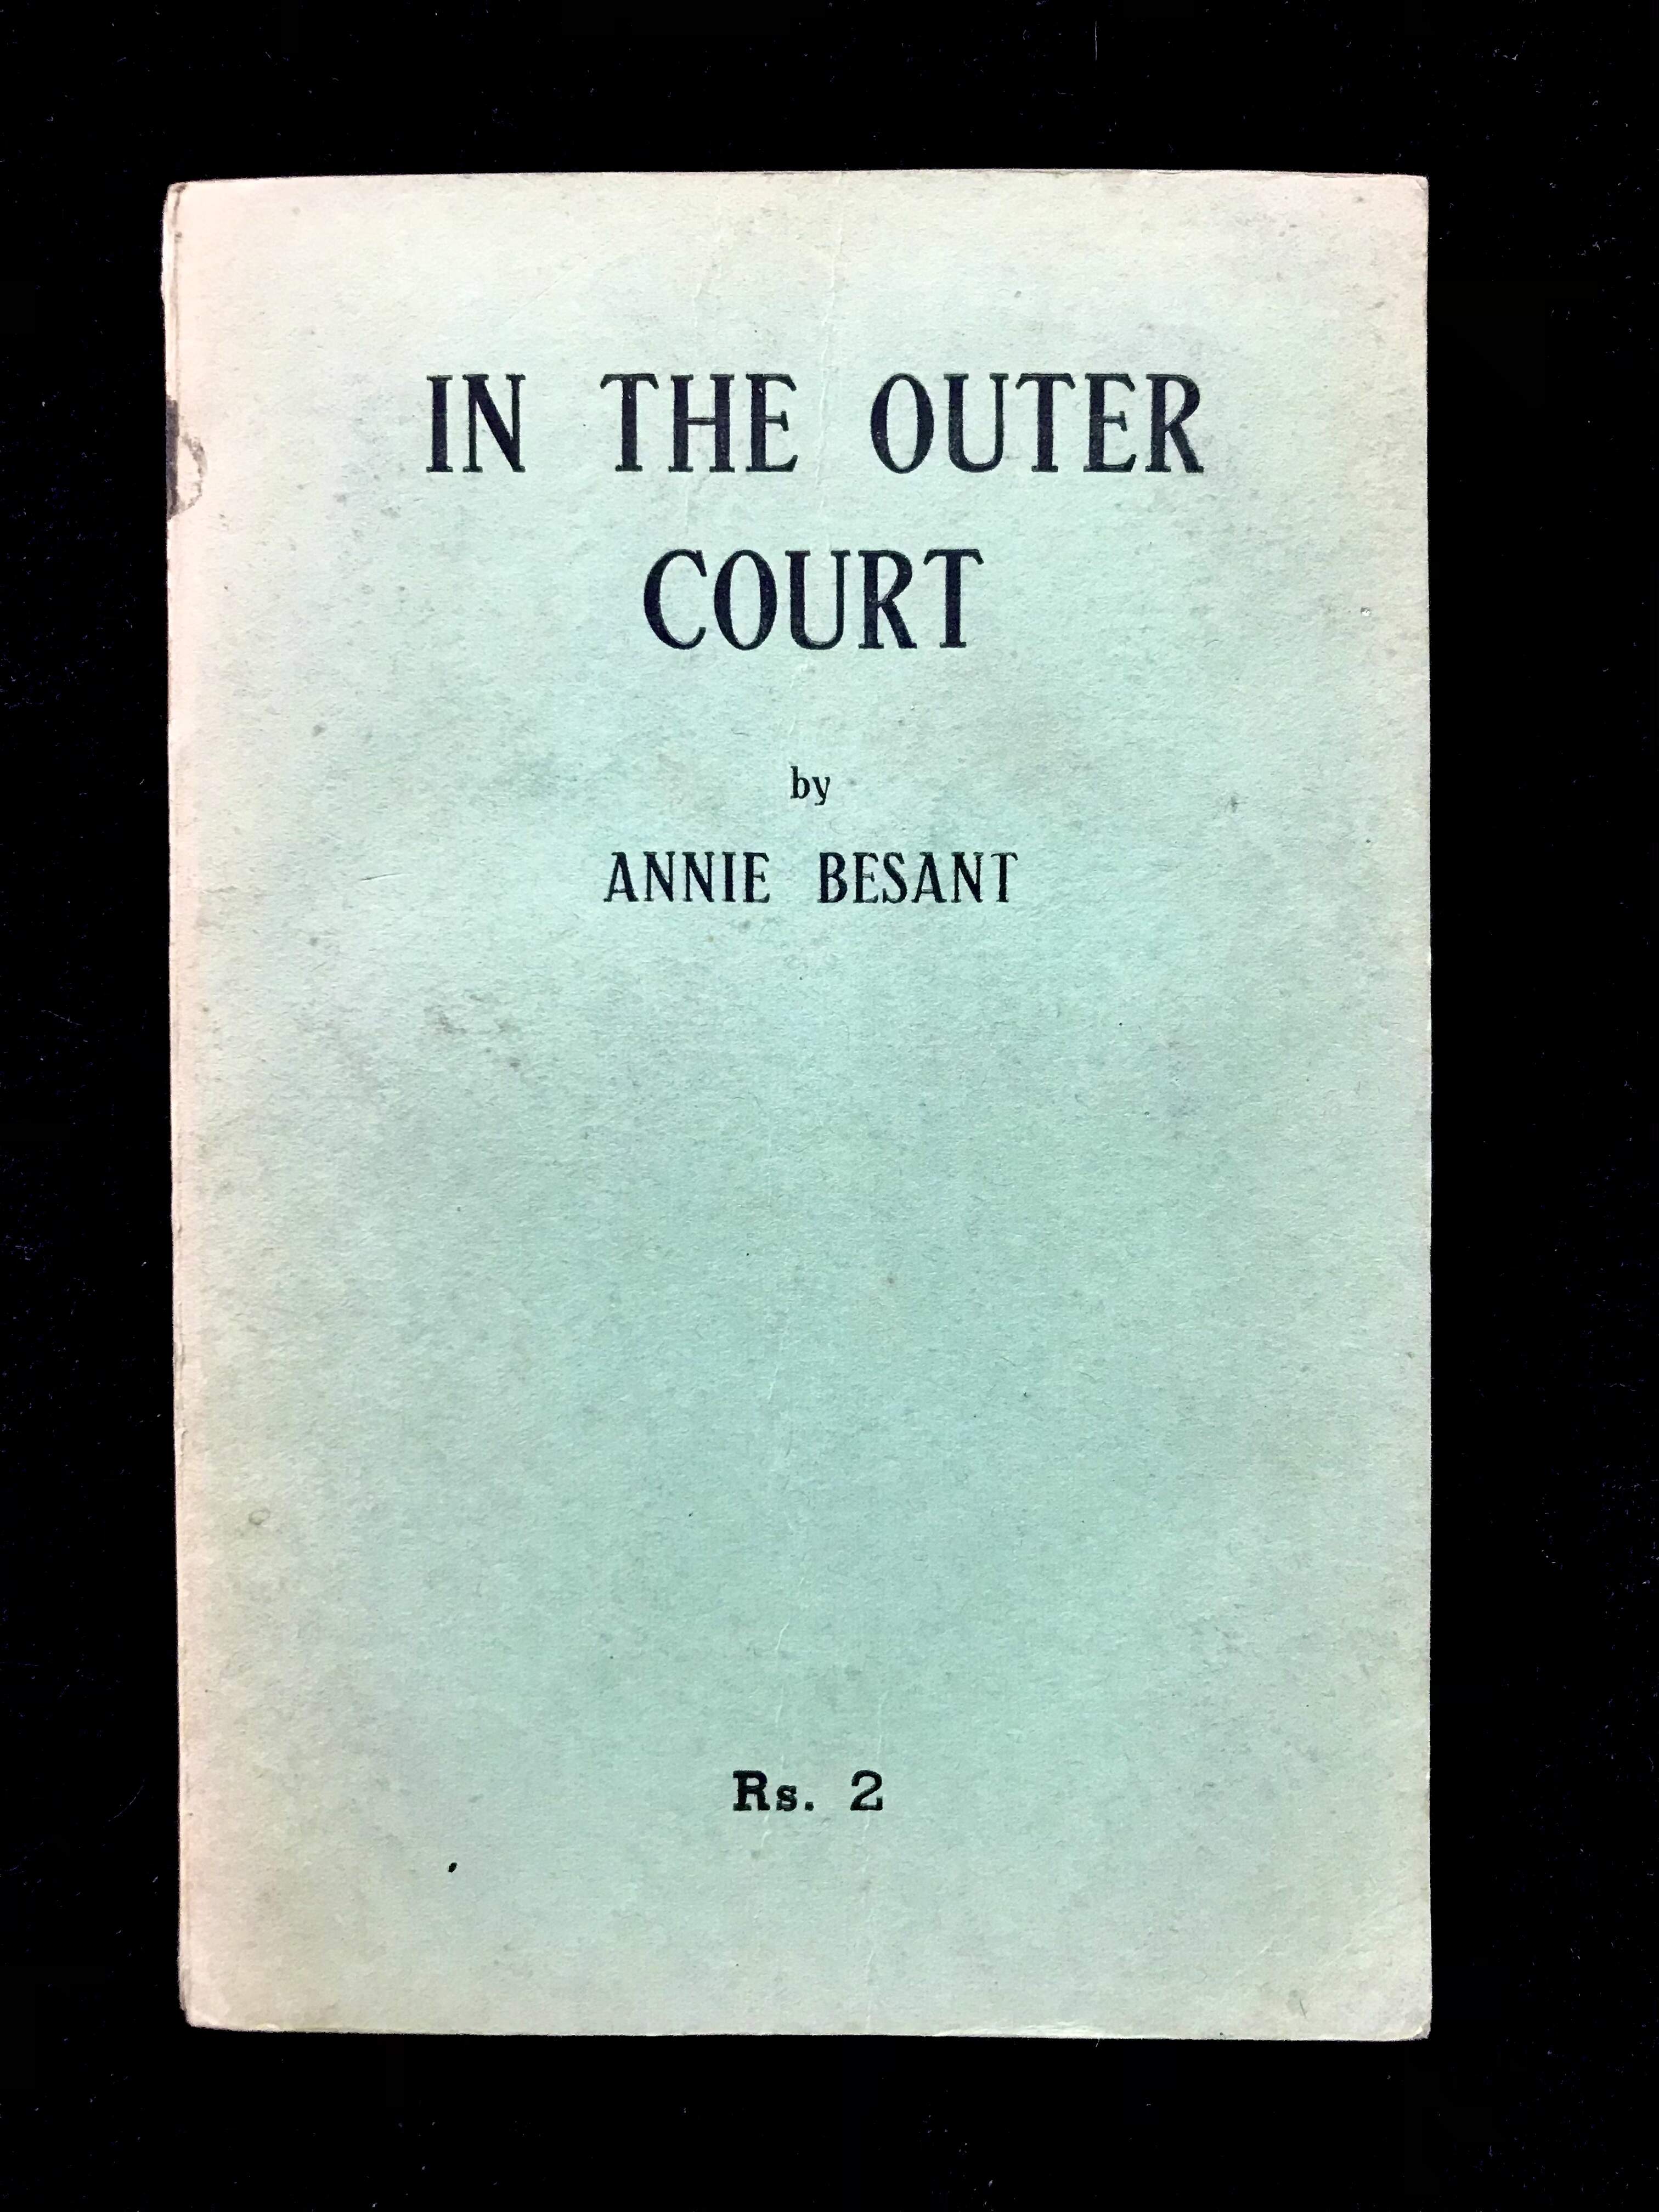 In The Outer Court by Annie Besant